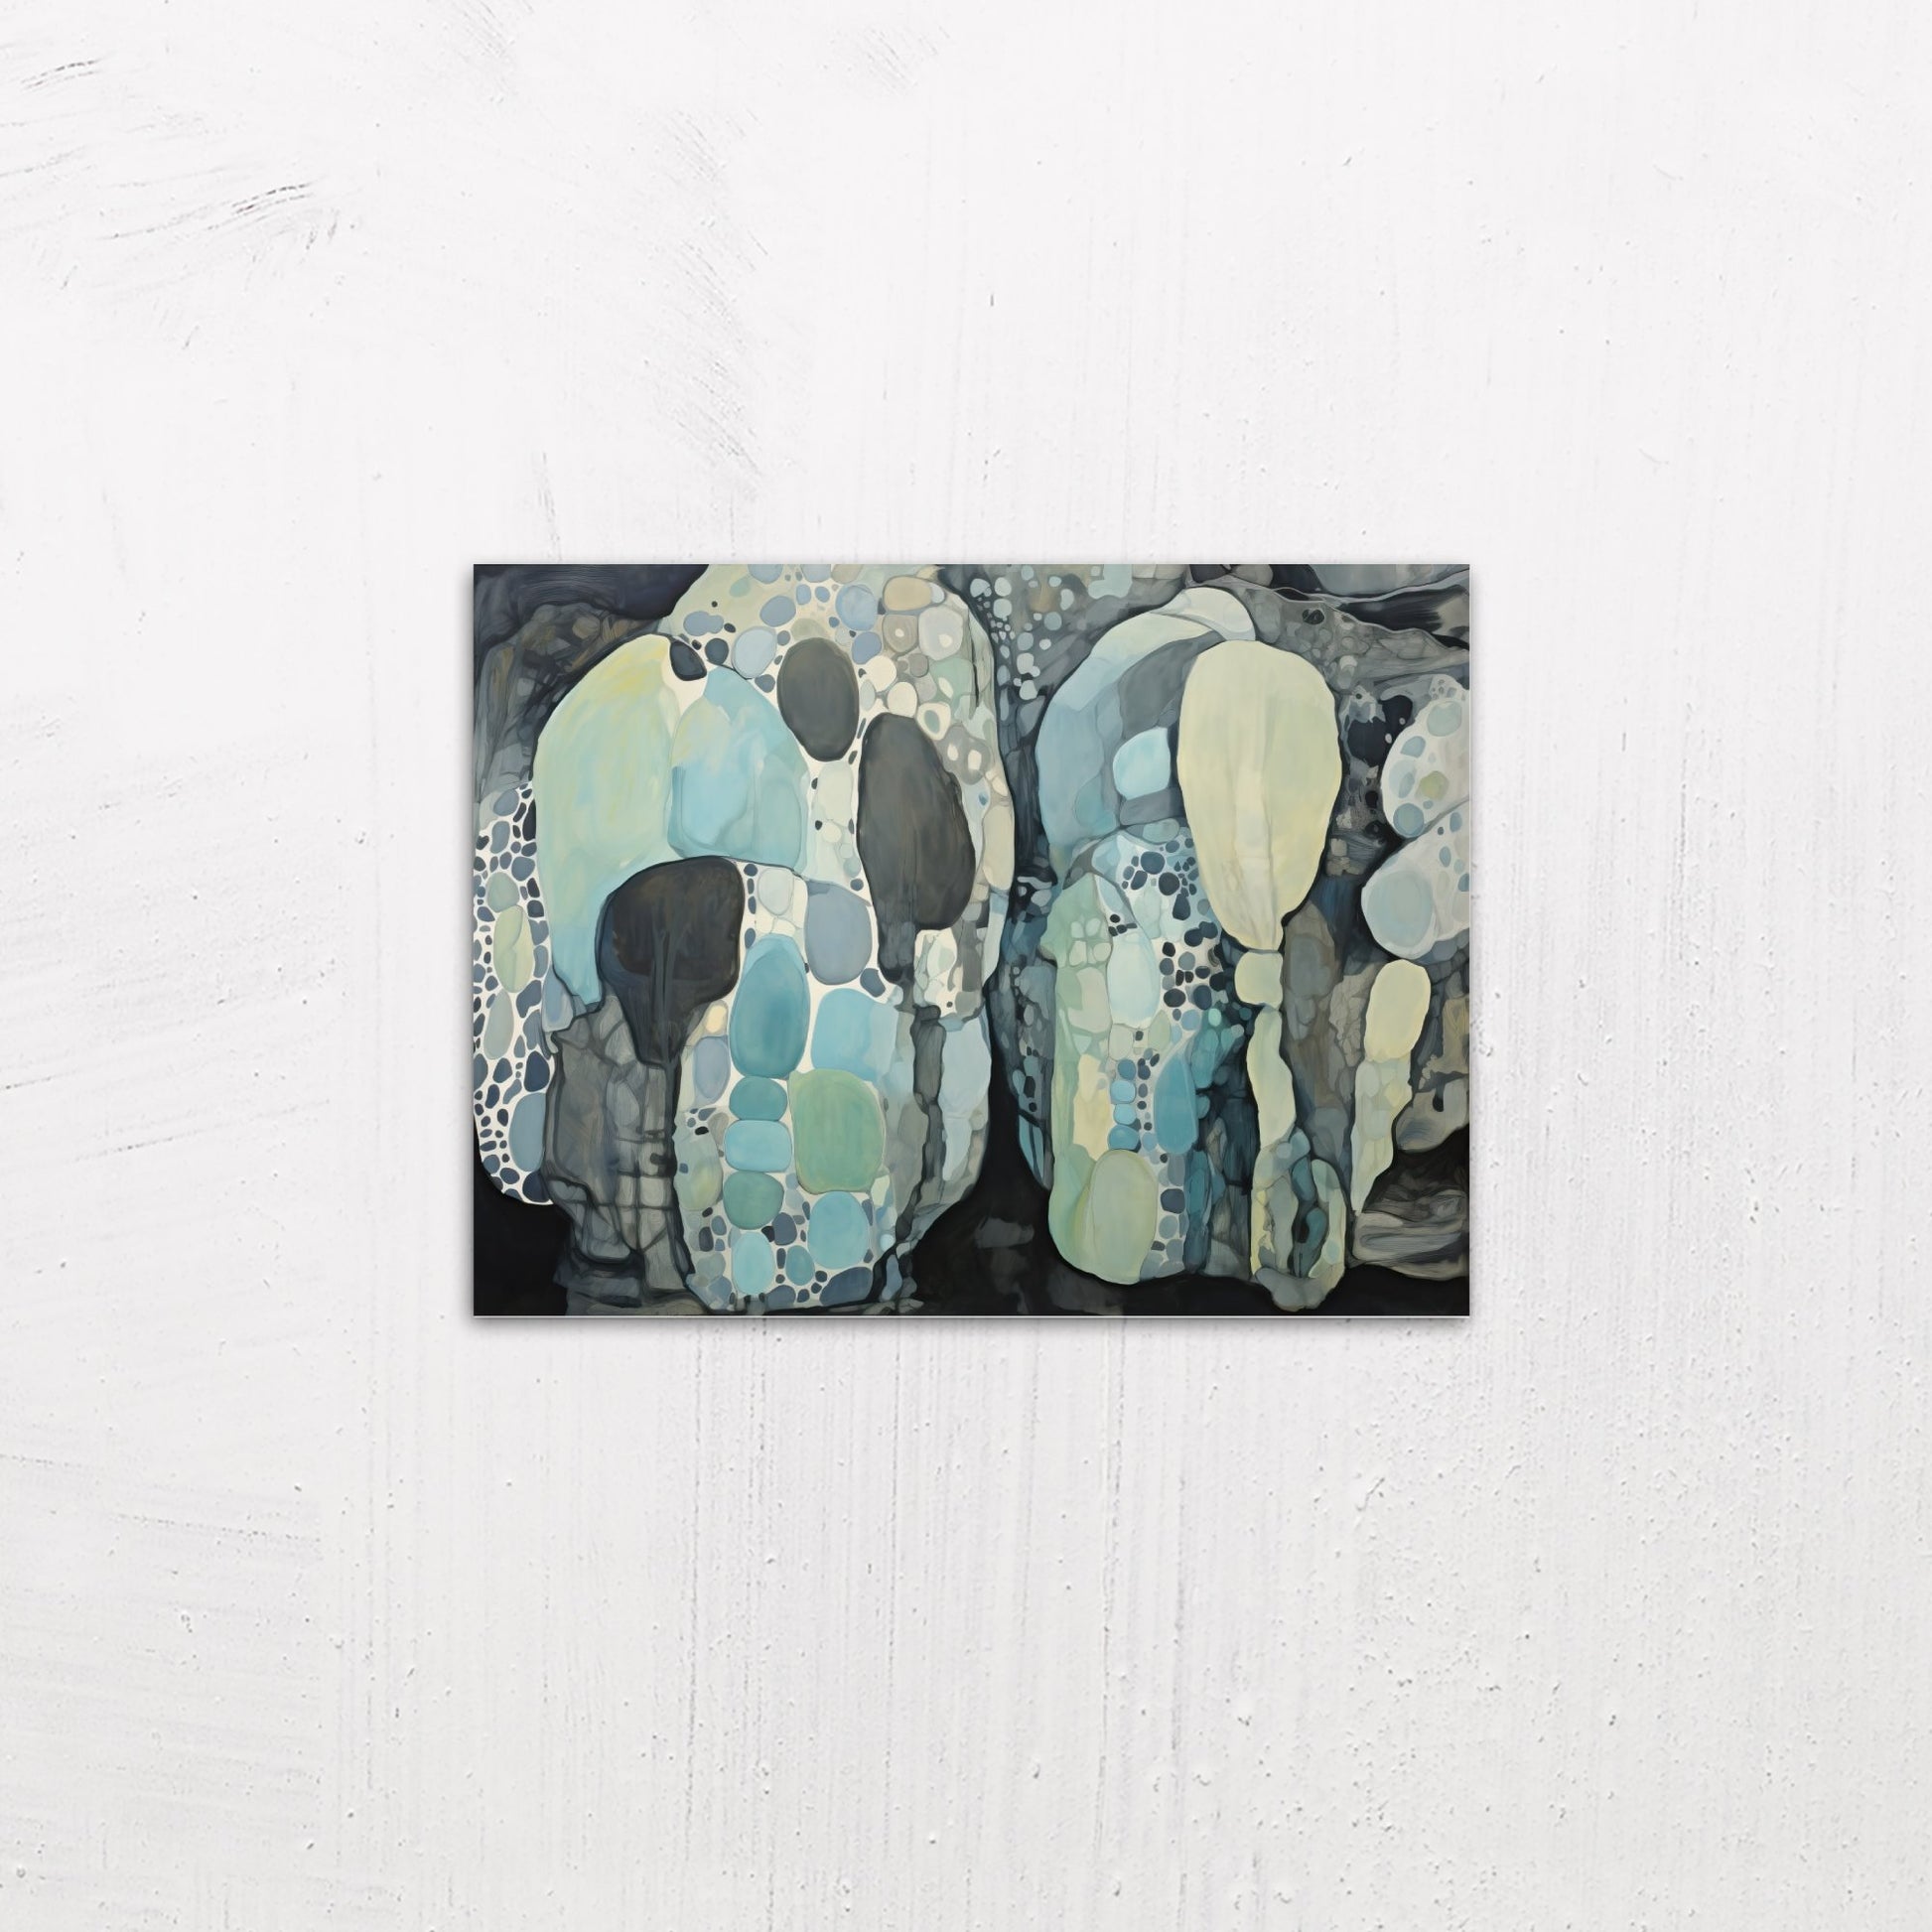 A small size metal art poster display plate with printed design of a Blue Rocks Abstract Painting